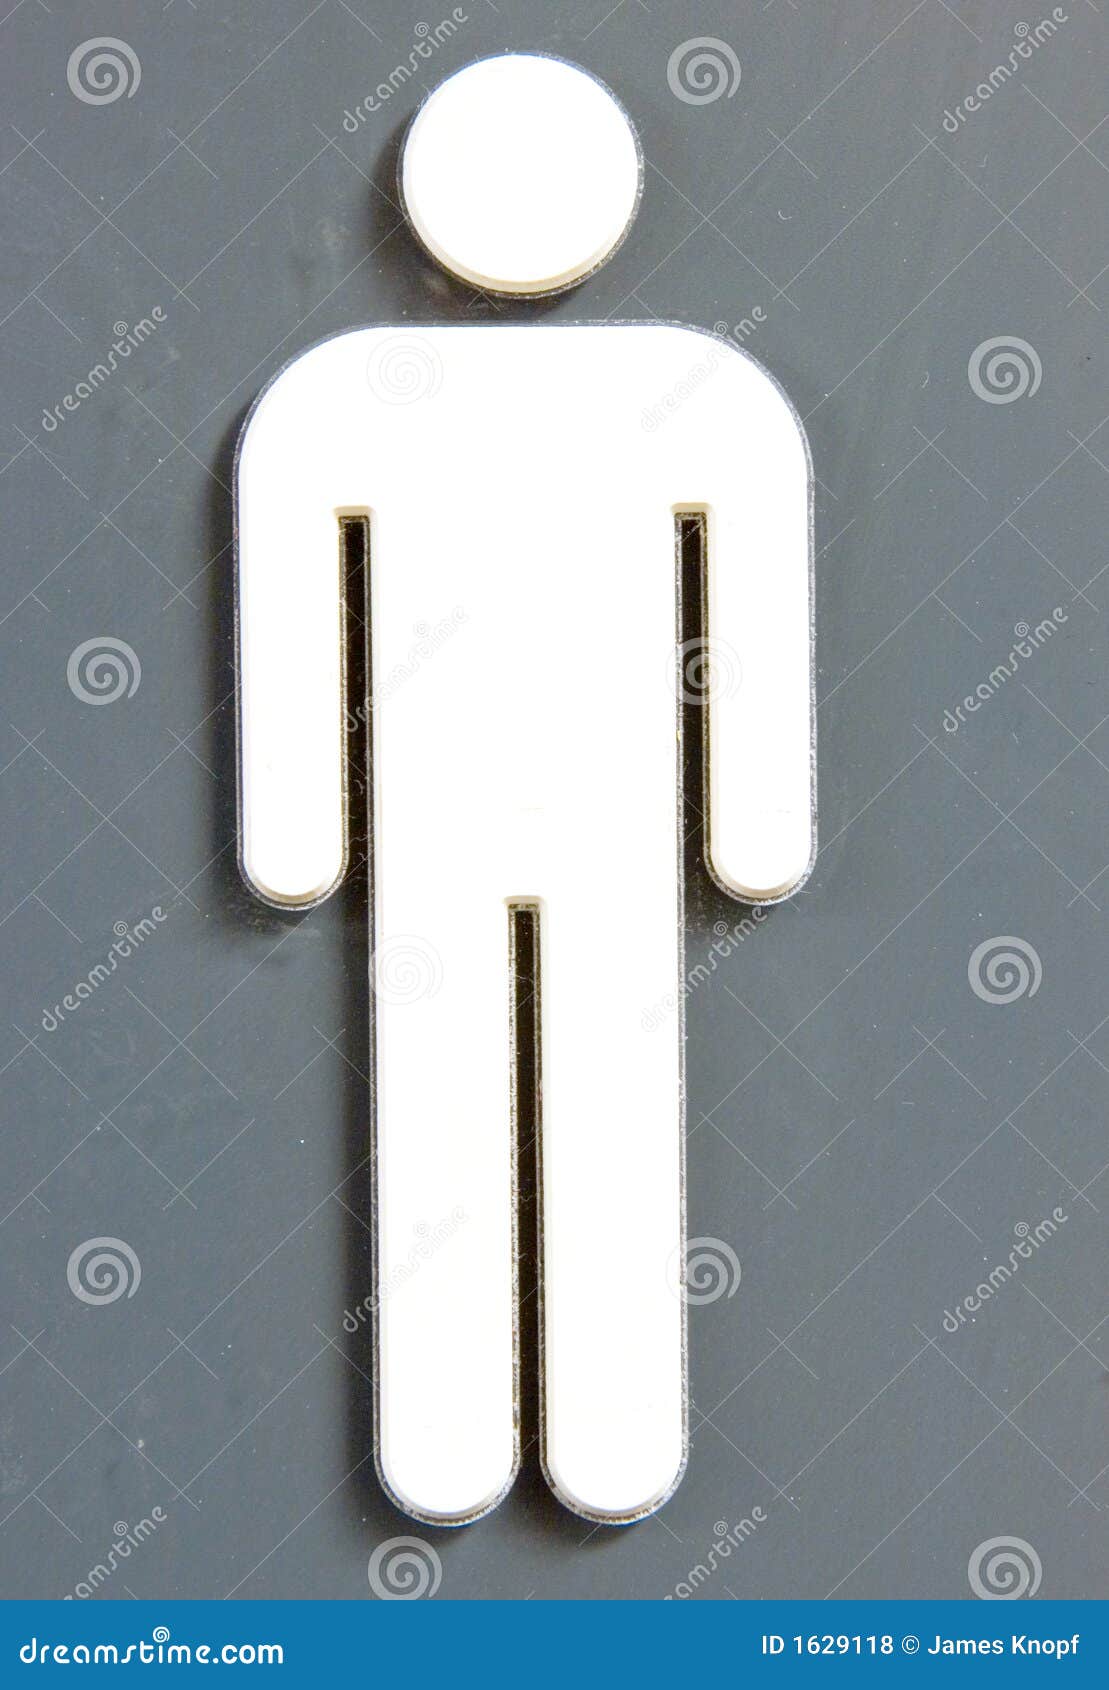 Man sign stock photo. Image of public, toilet, rest, male - 1629118